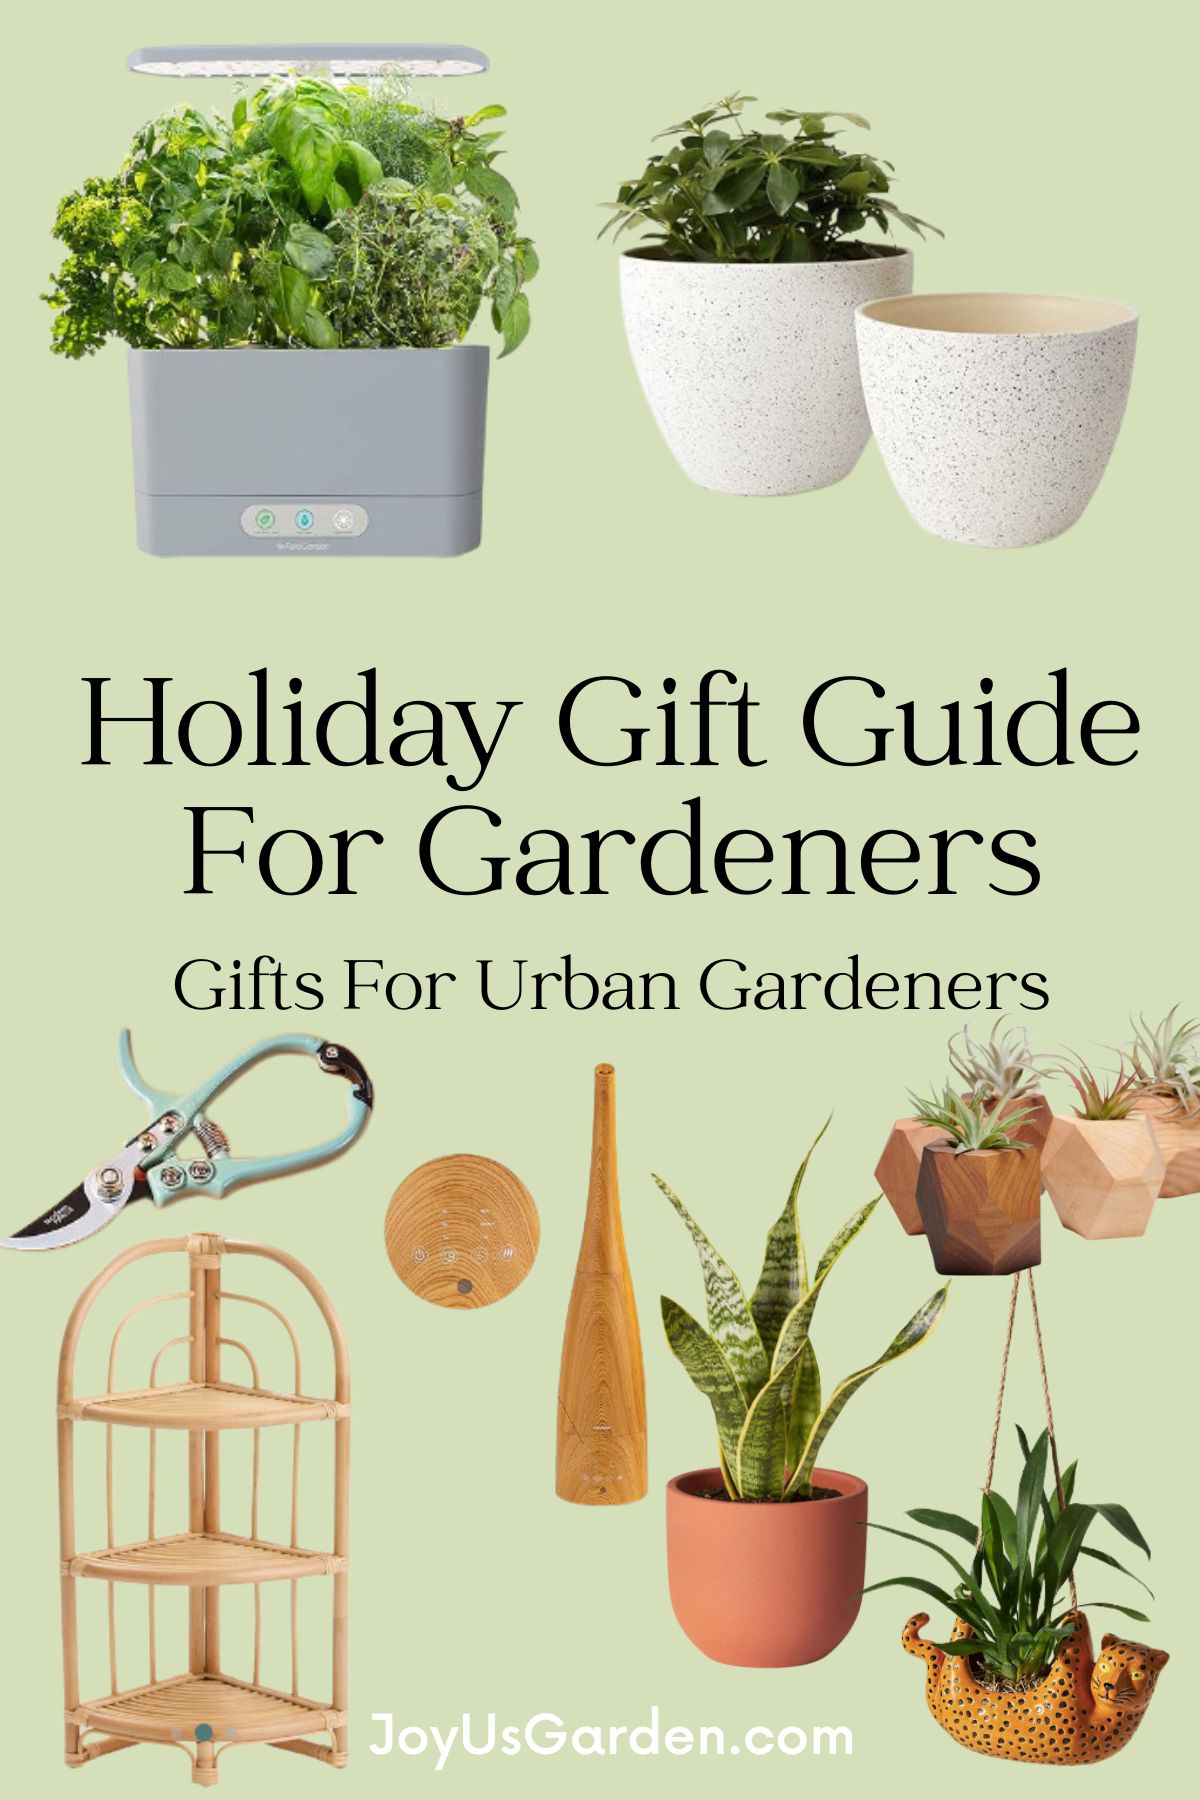 Holiday gift guide collage of products that can be purchased online for urban gardeners.